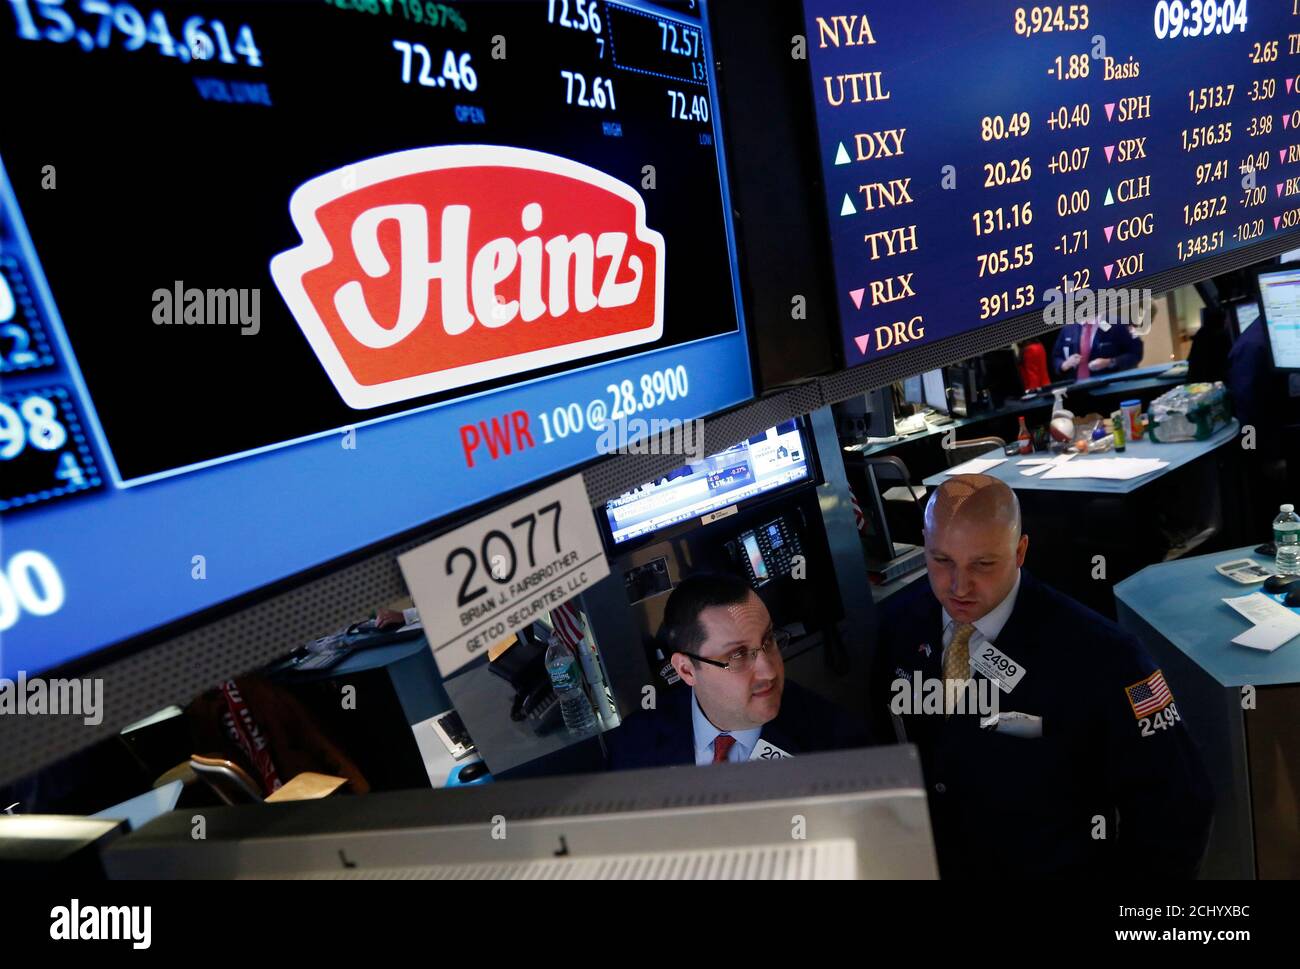 Traders work at the post that trades H.J. Heinz Co. on the floor of the New York Stock Exchange, February 14, 2013. Warren Buffett's Berkshire Hathaway and private equity firm 3G Capital will buy ketchup and baby food maker H.J. Heinz Co for $23.2 billion in cash, a deal that combines 3G's ambitions in the food industry with Buffett's hunt for growth. REUTERS/Brendan McDermid (UNITED STATES - Tags: BUSINESS FOOD) Stock Photo